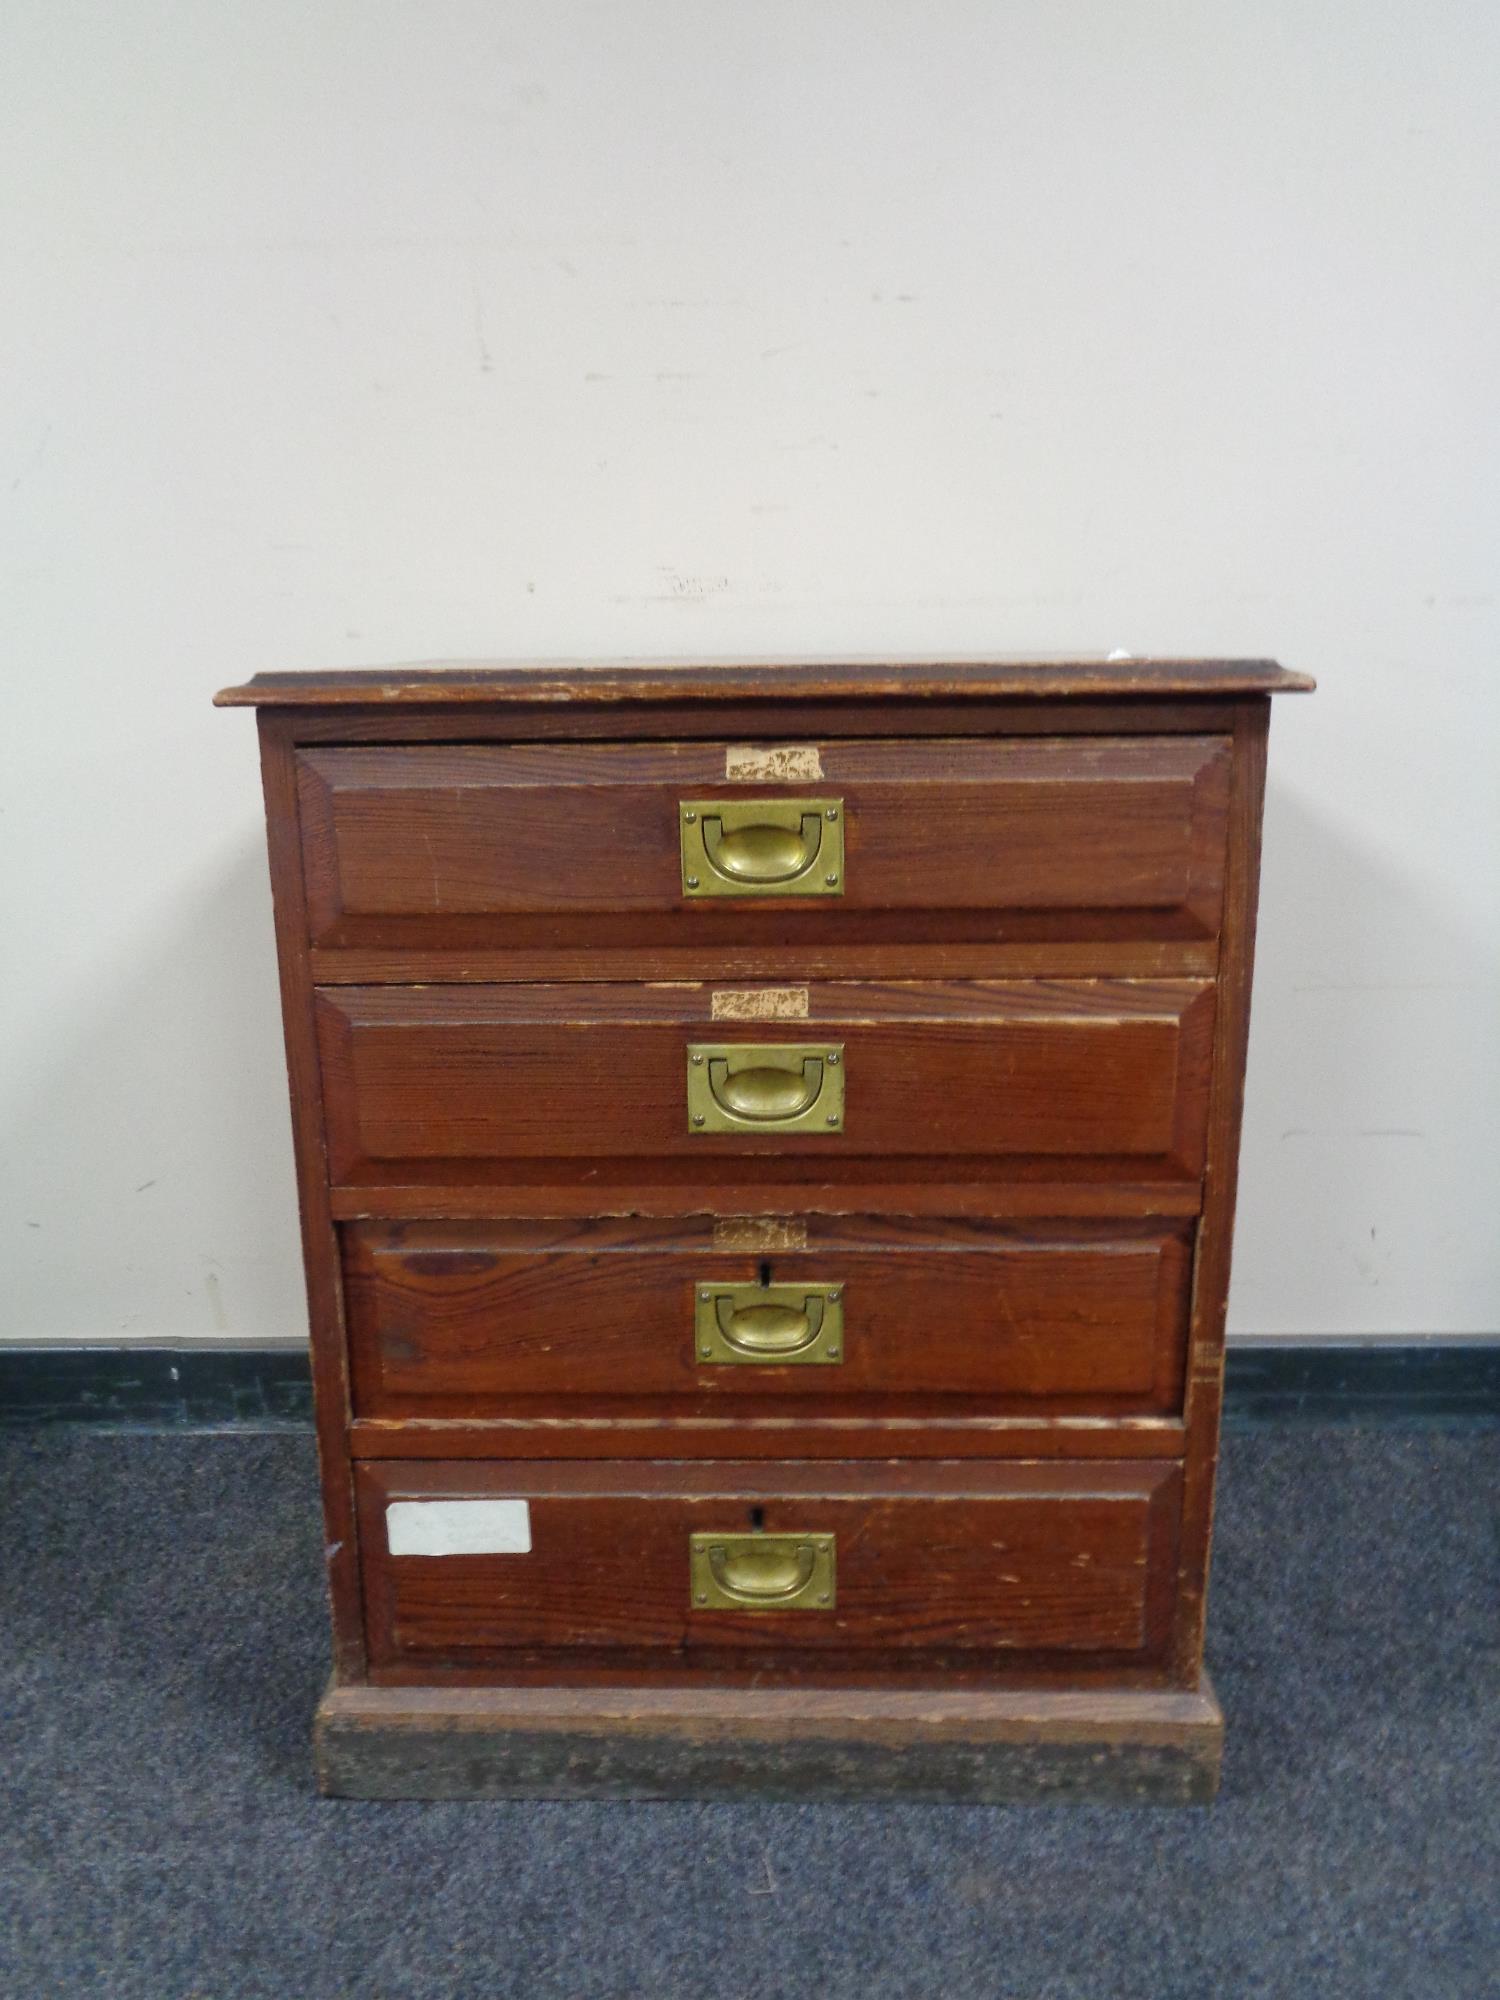 An Edwardian pine four drawer chest with brass drop handles